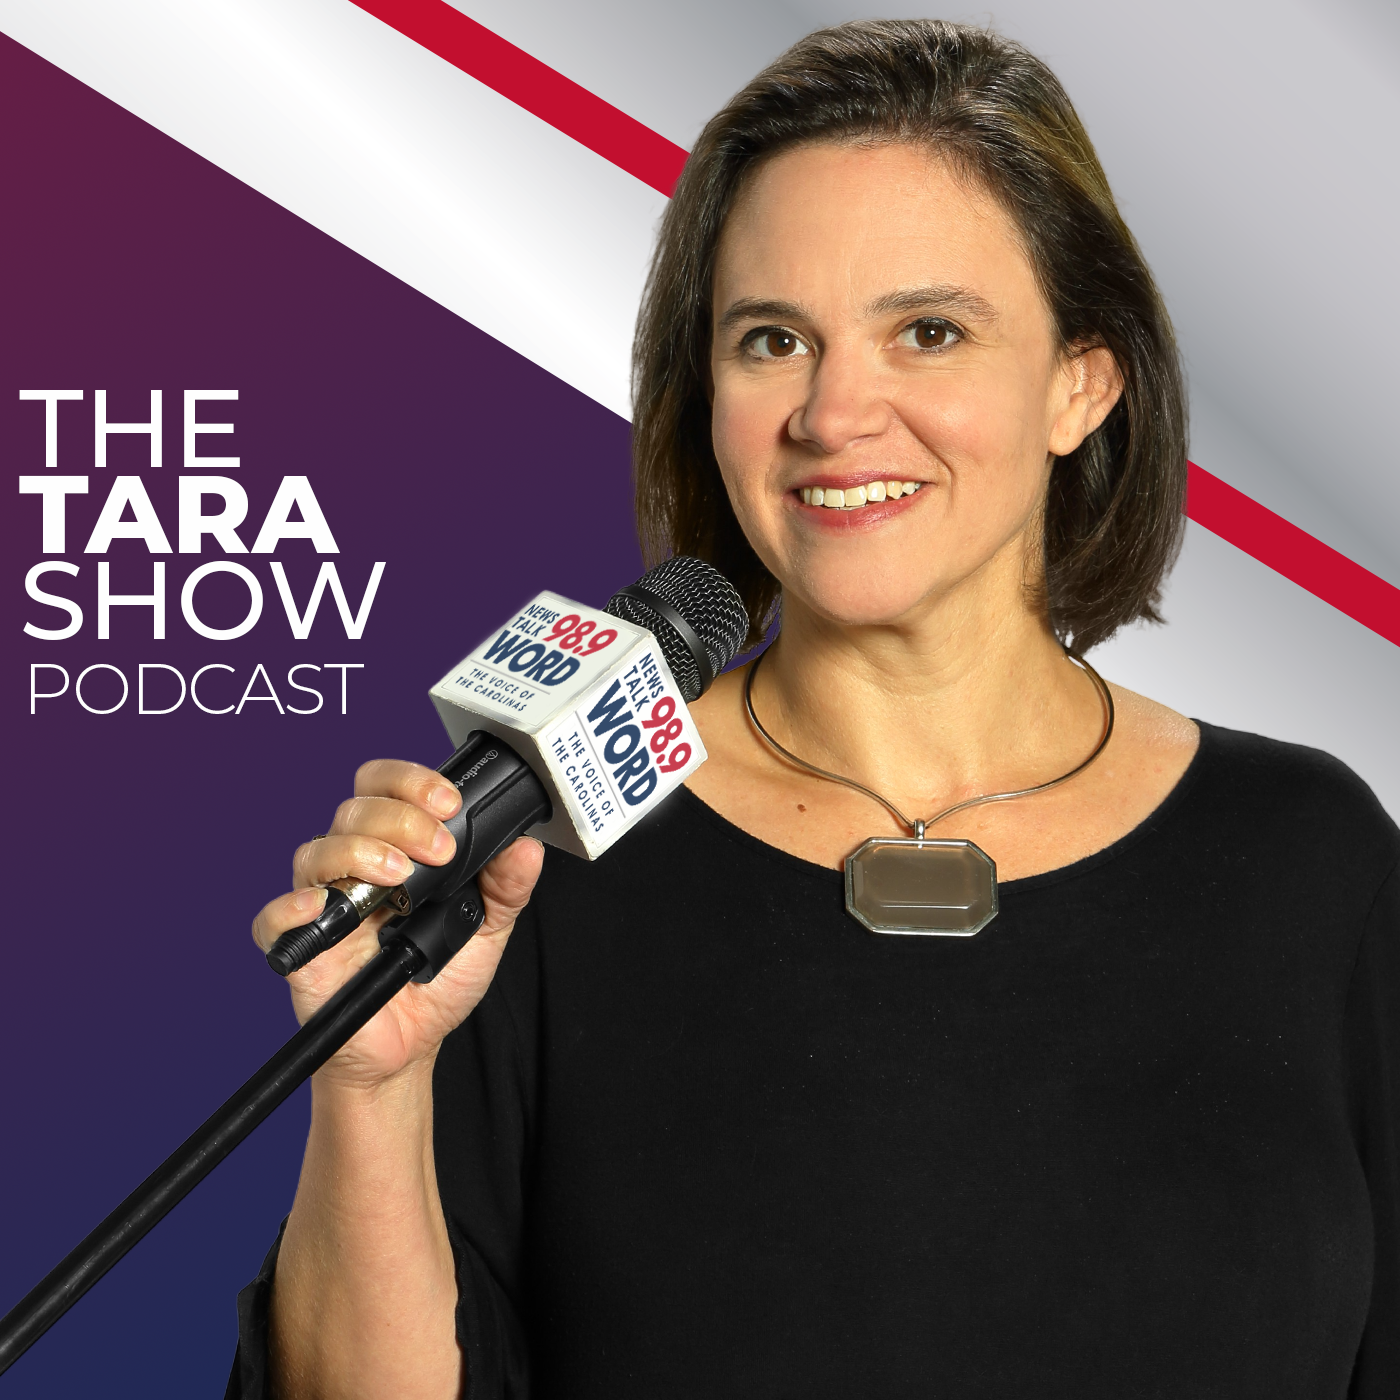 Hour 2: The Tara Show - “Can America go Bankrupt?” “The Tax Roller Coaster” “Libs Getting Rich Prosecuting Trump” “Protests at UNC Chapel Hill”